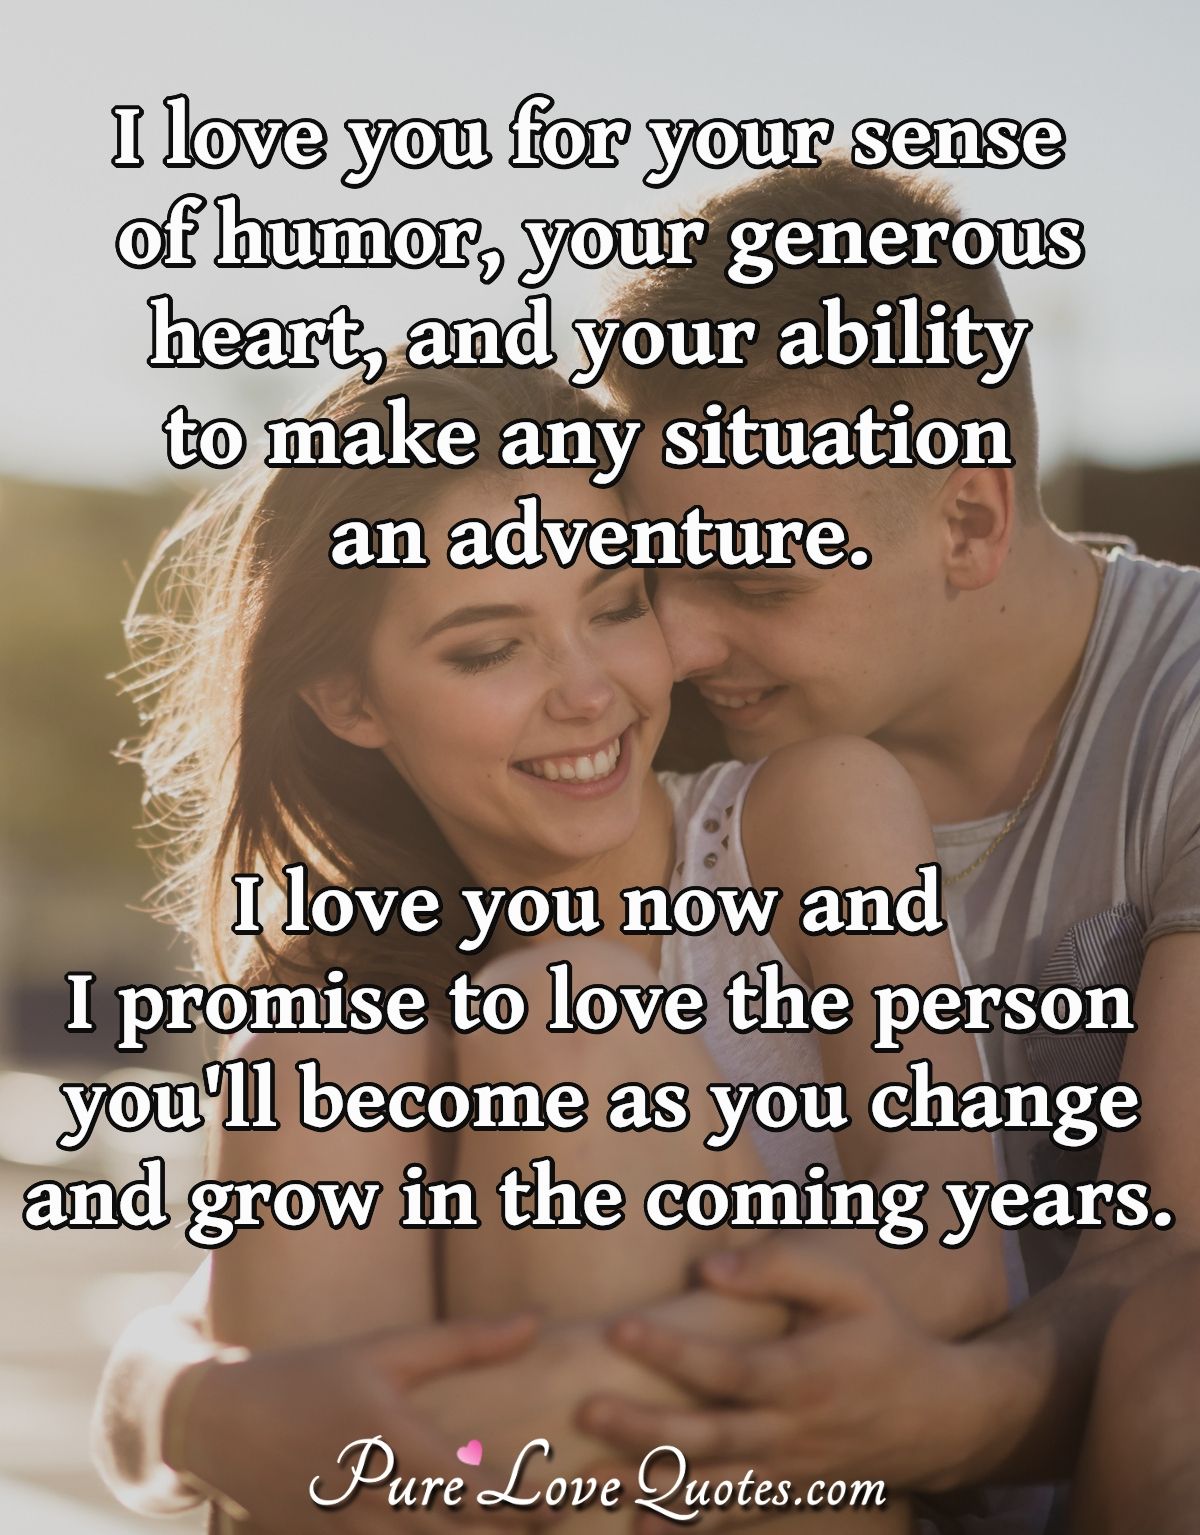 I love you for your sense of humor, your generous heart, and your ability to make any situation an adventure. I love you now and I promise to love the person you'll become as you change and grow in the coming years. - Anonymous